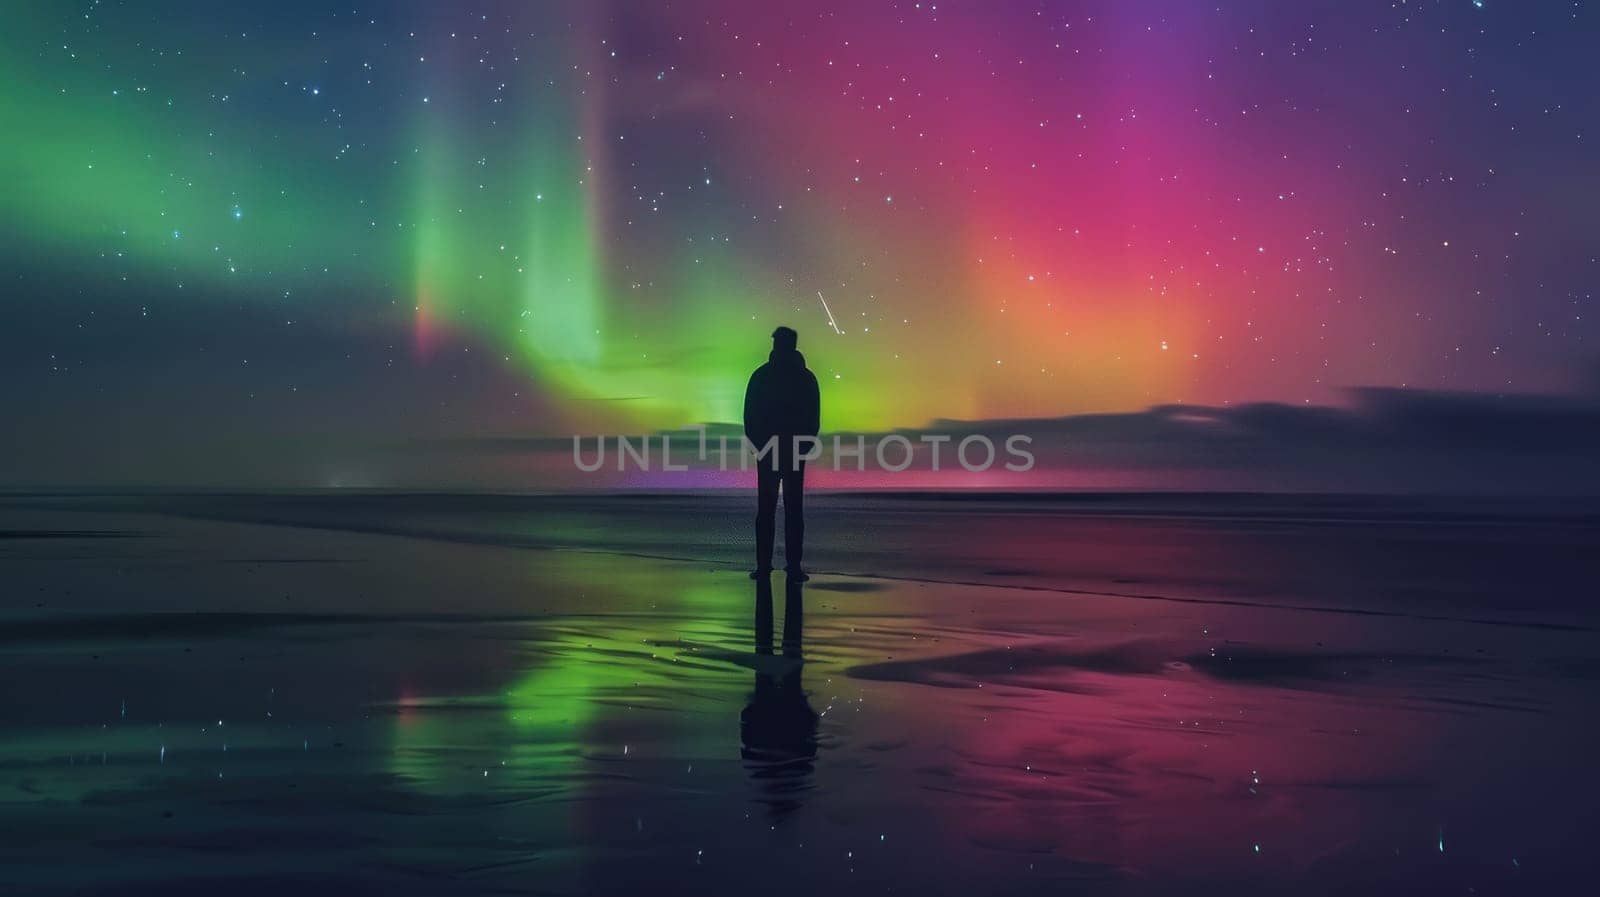 A man stands on the beach, with a colorful aurora borealis in the sky and reflections of light in the water..